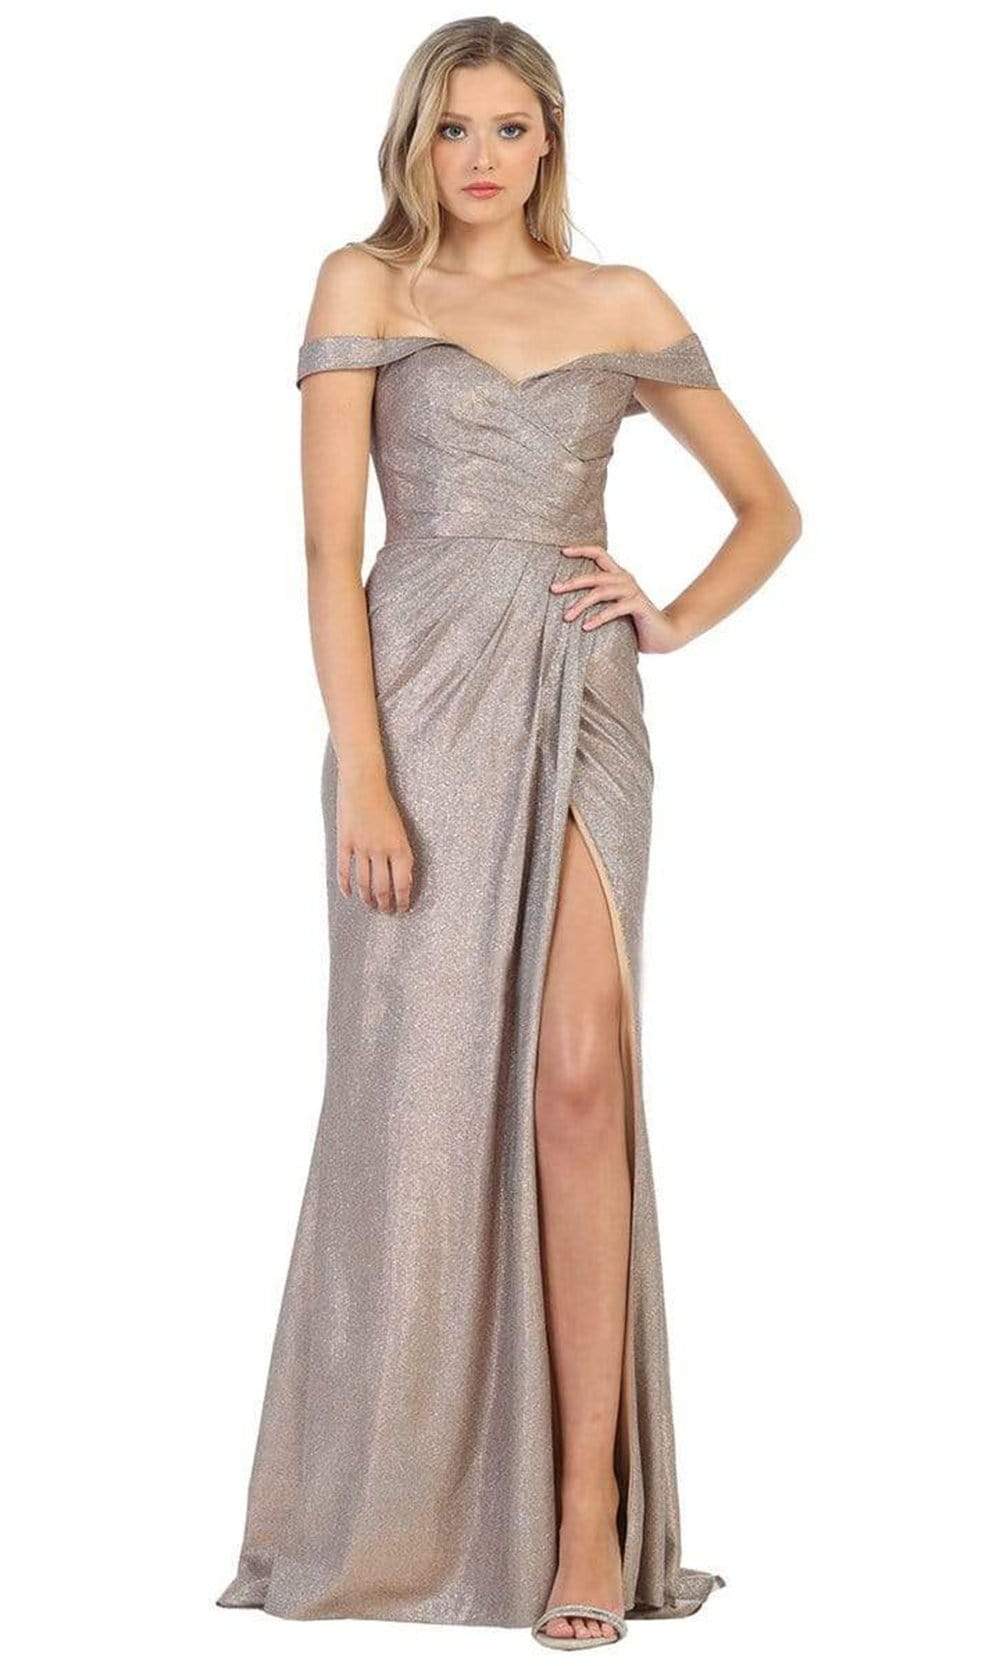 May Queen - MQ1724 Ruched Off-Shoulder Dress with Slit Evening Dresses 4 / Bronze/ Multi